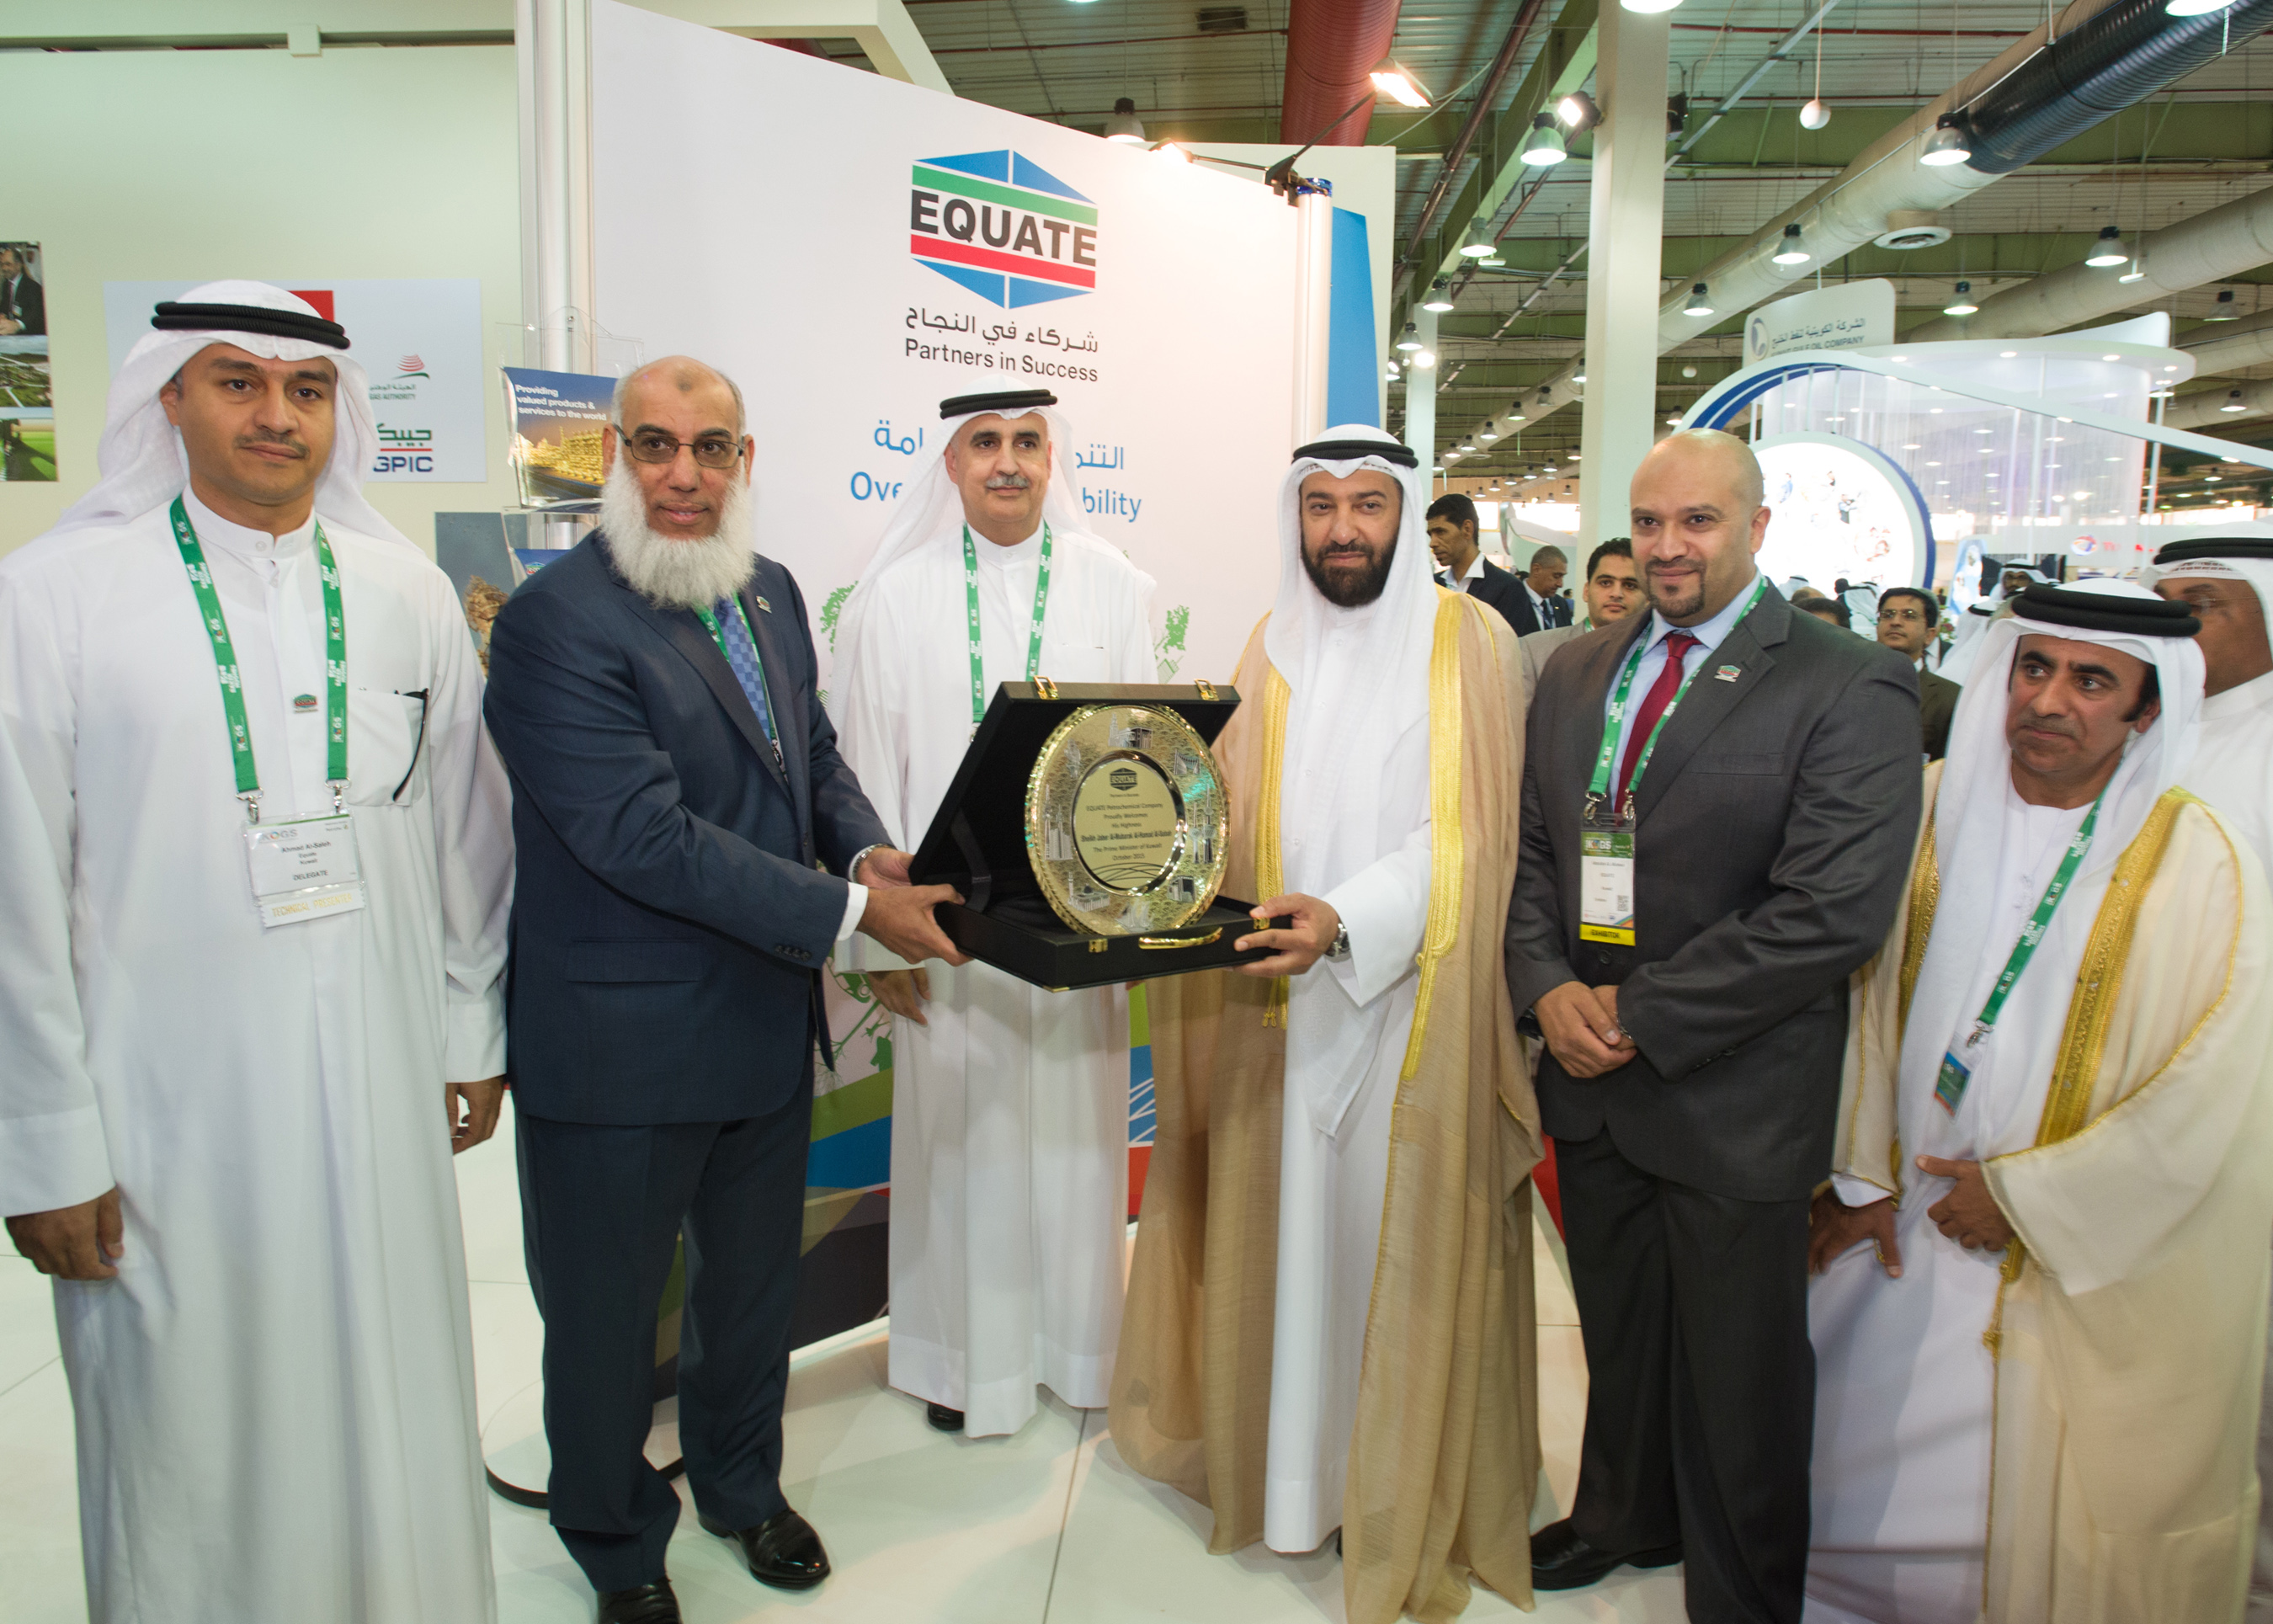 EQUATE sponsors Kuwait Oil & Gas Show & Conference 2015